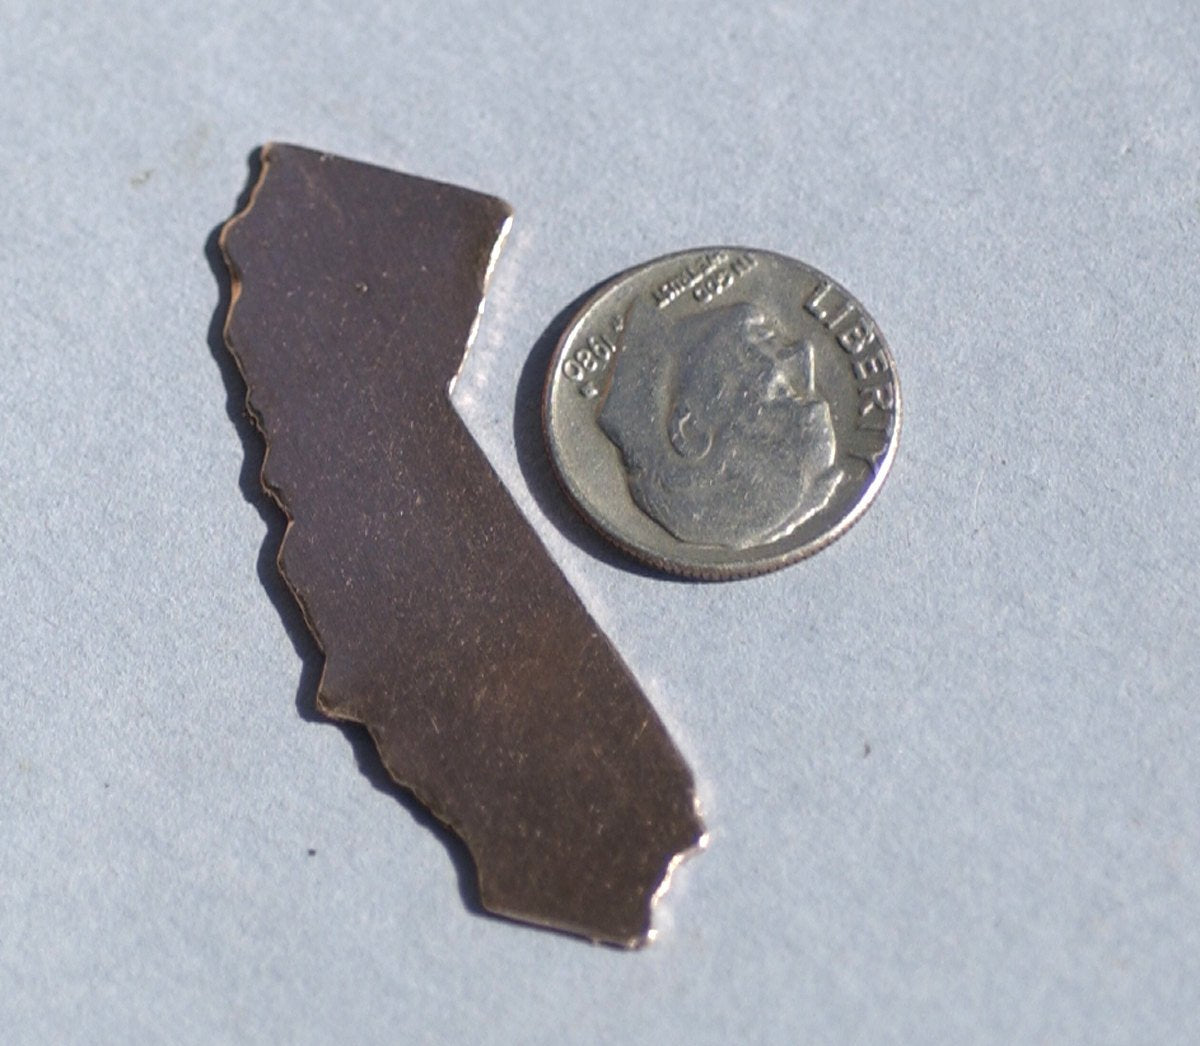 Nickel Silver California State Blanks Cutout for Enameling Metalworking Stamping Texturing 100% Nickel Silver Blank - 4 pieces